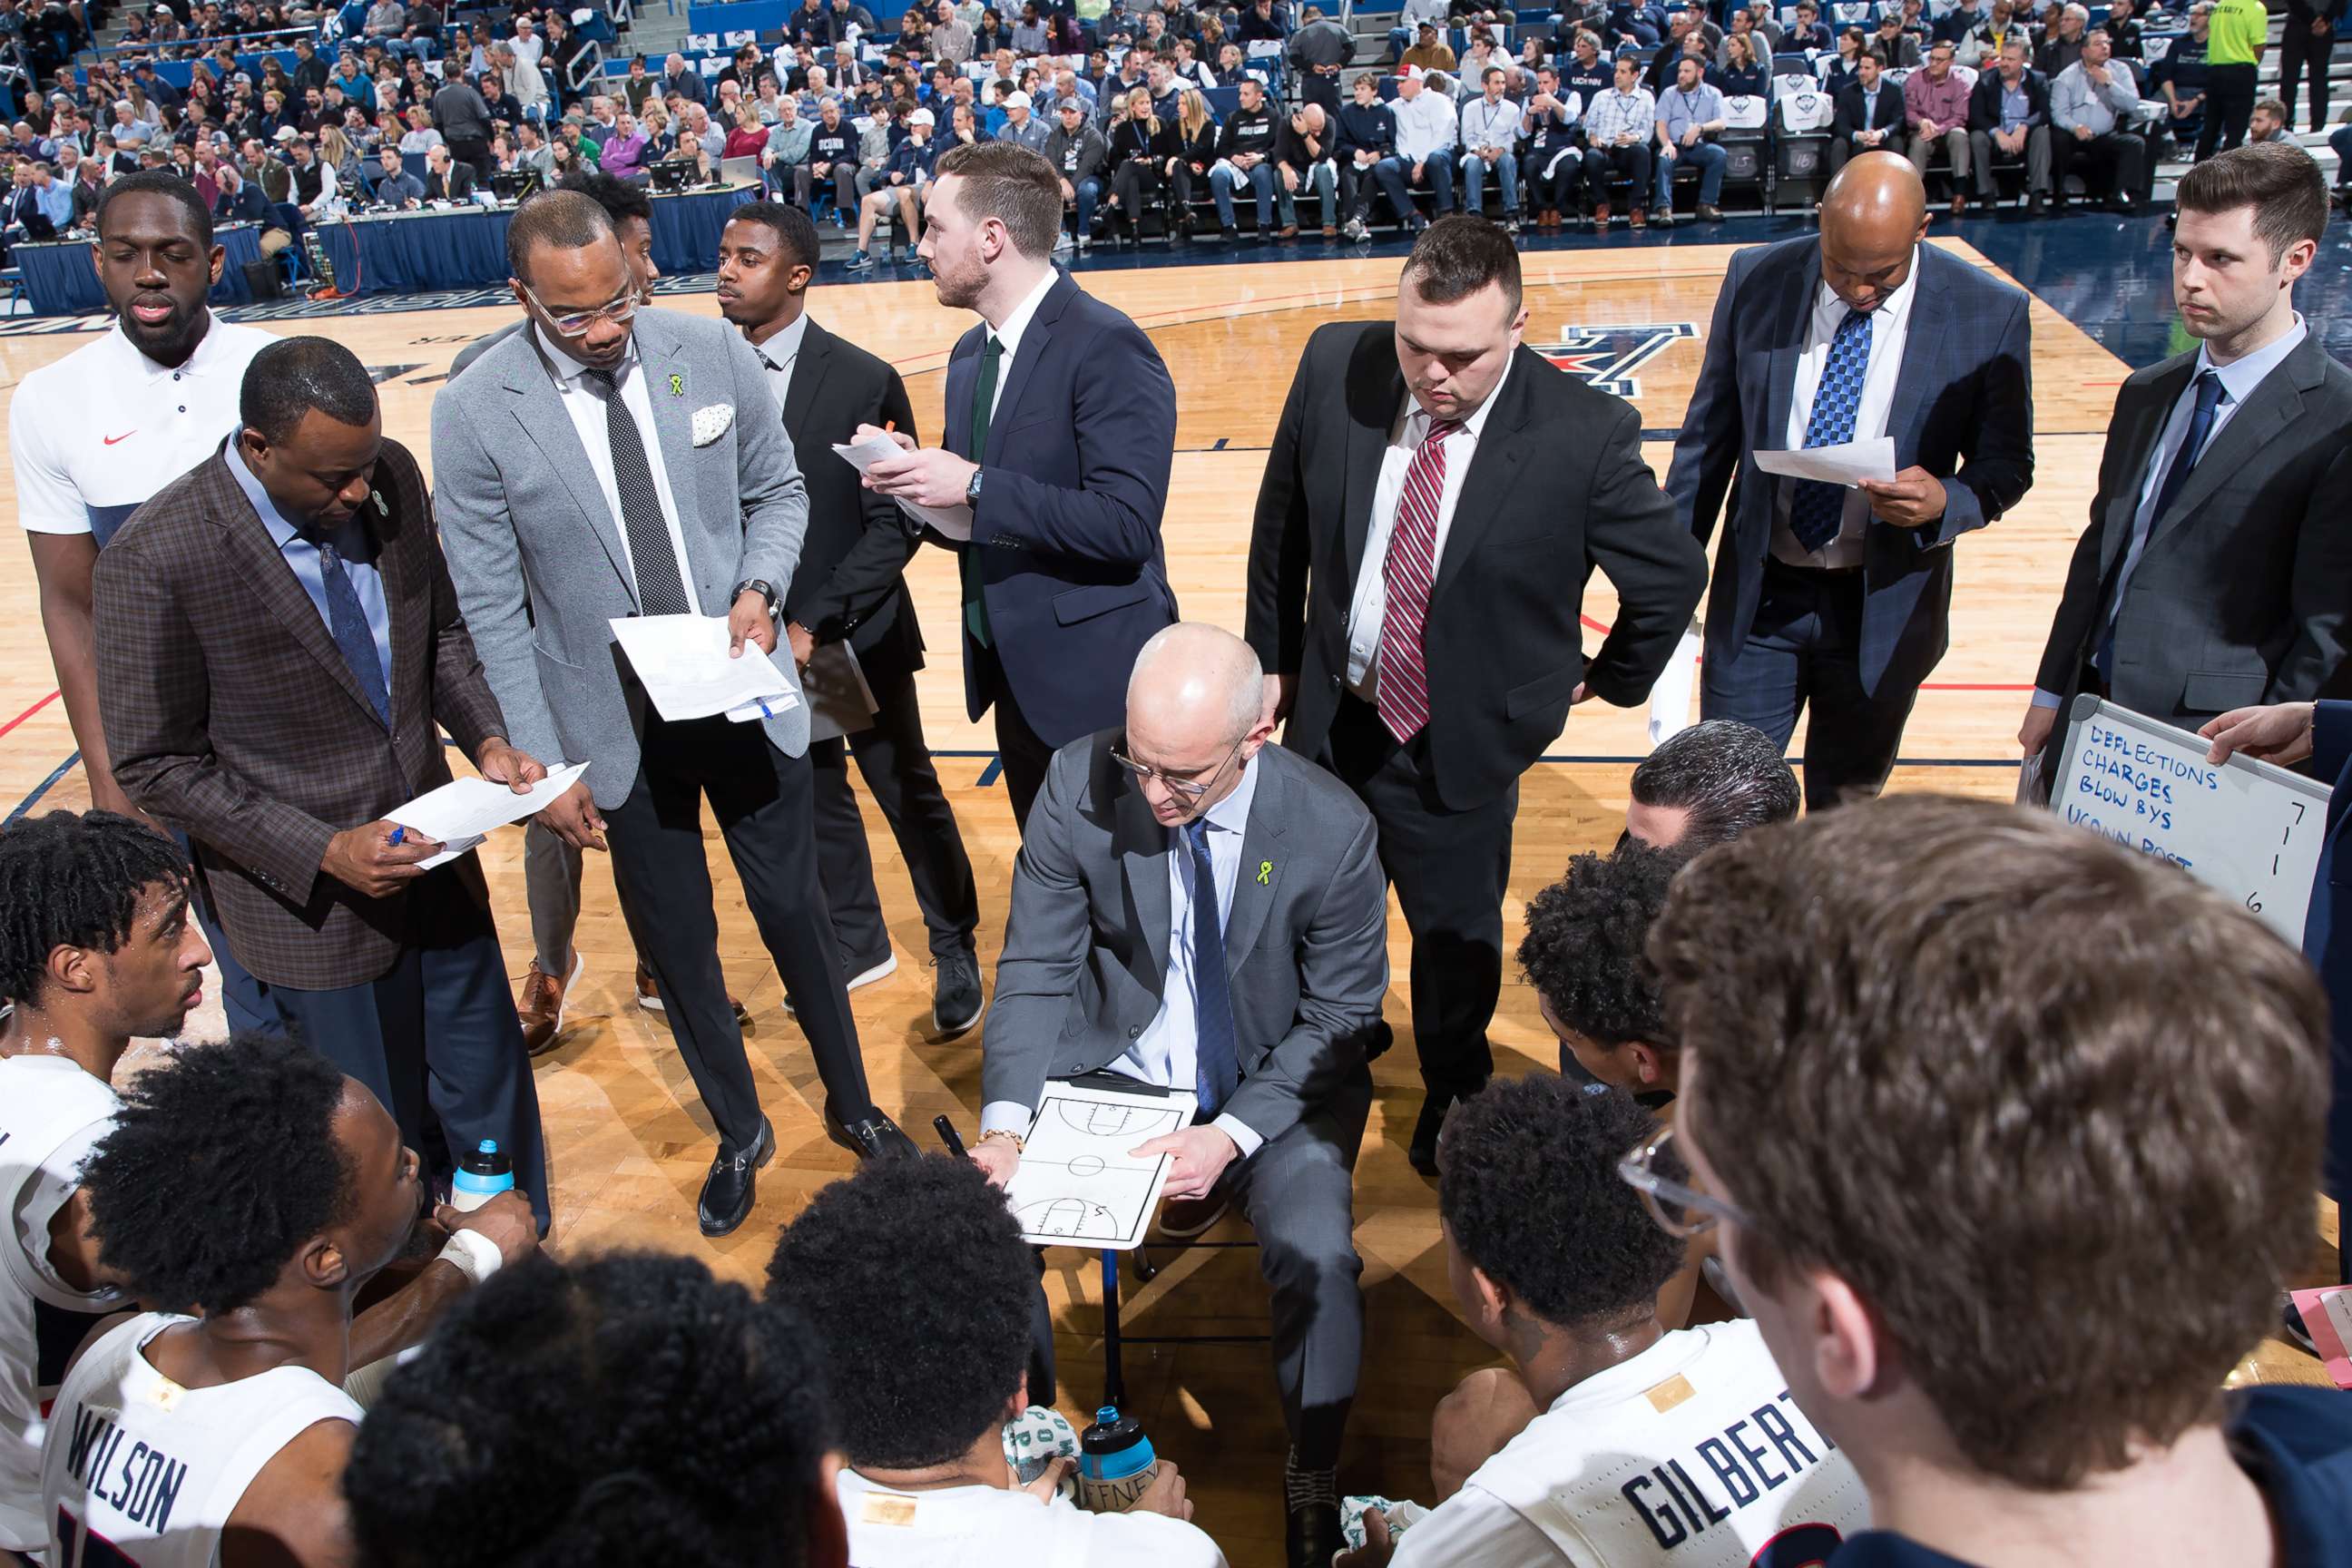 PHOTO: The University of Connecticut men's basketball team stands in a huddle with coach Dan Hurley during a game.